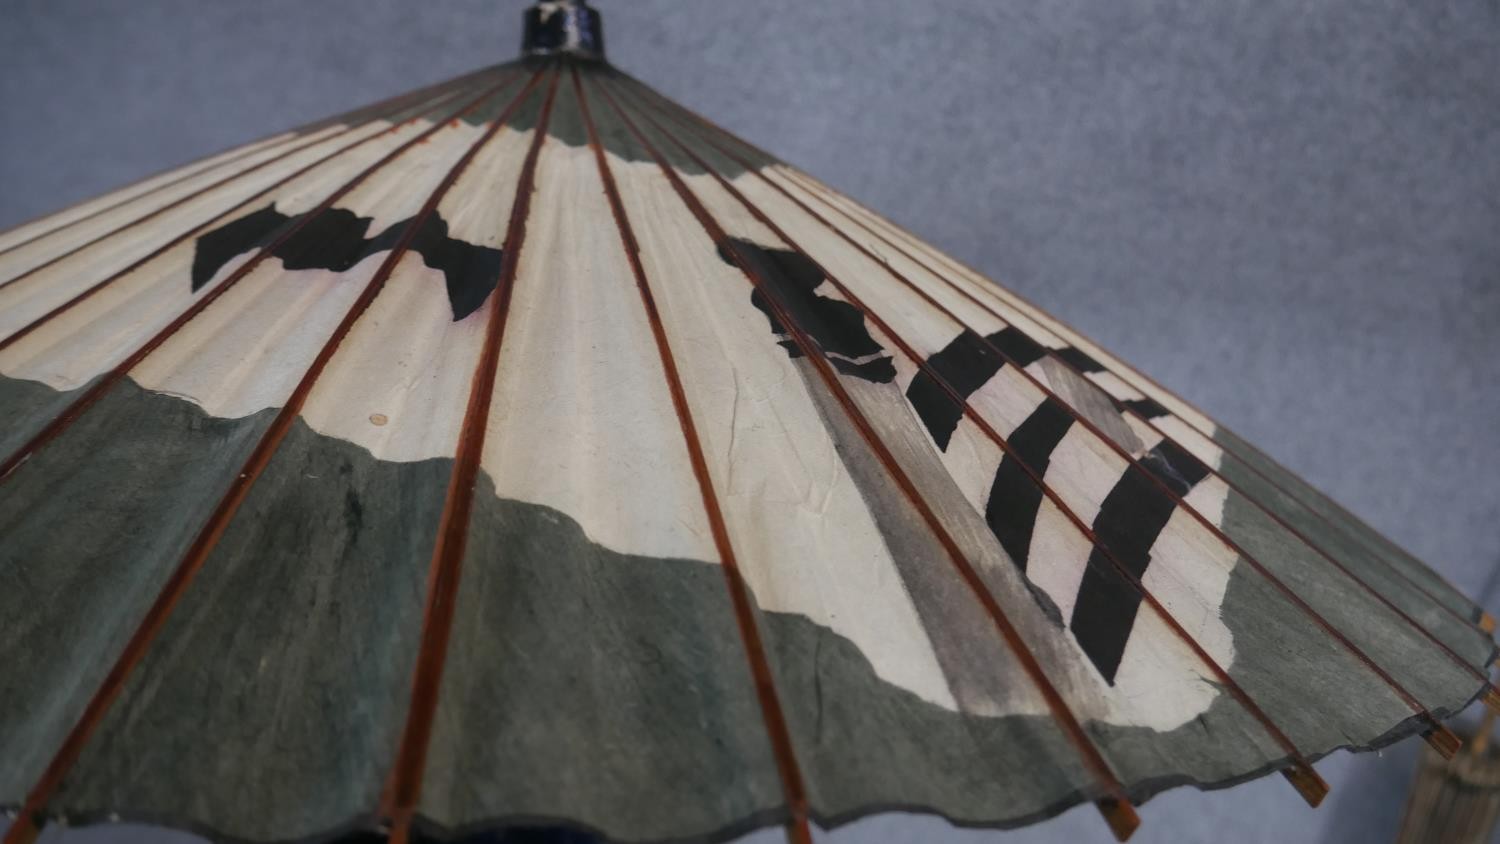 Two antique Chinese parasols, one with a painted wisteria flower design. L.95cm - Image 3 of 5